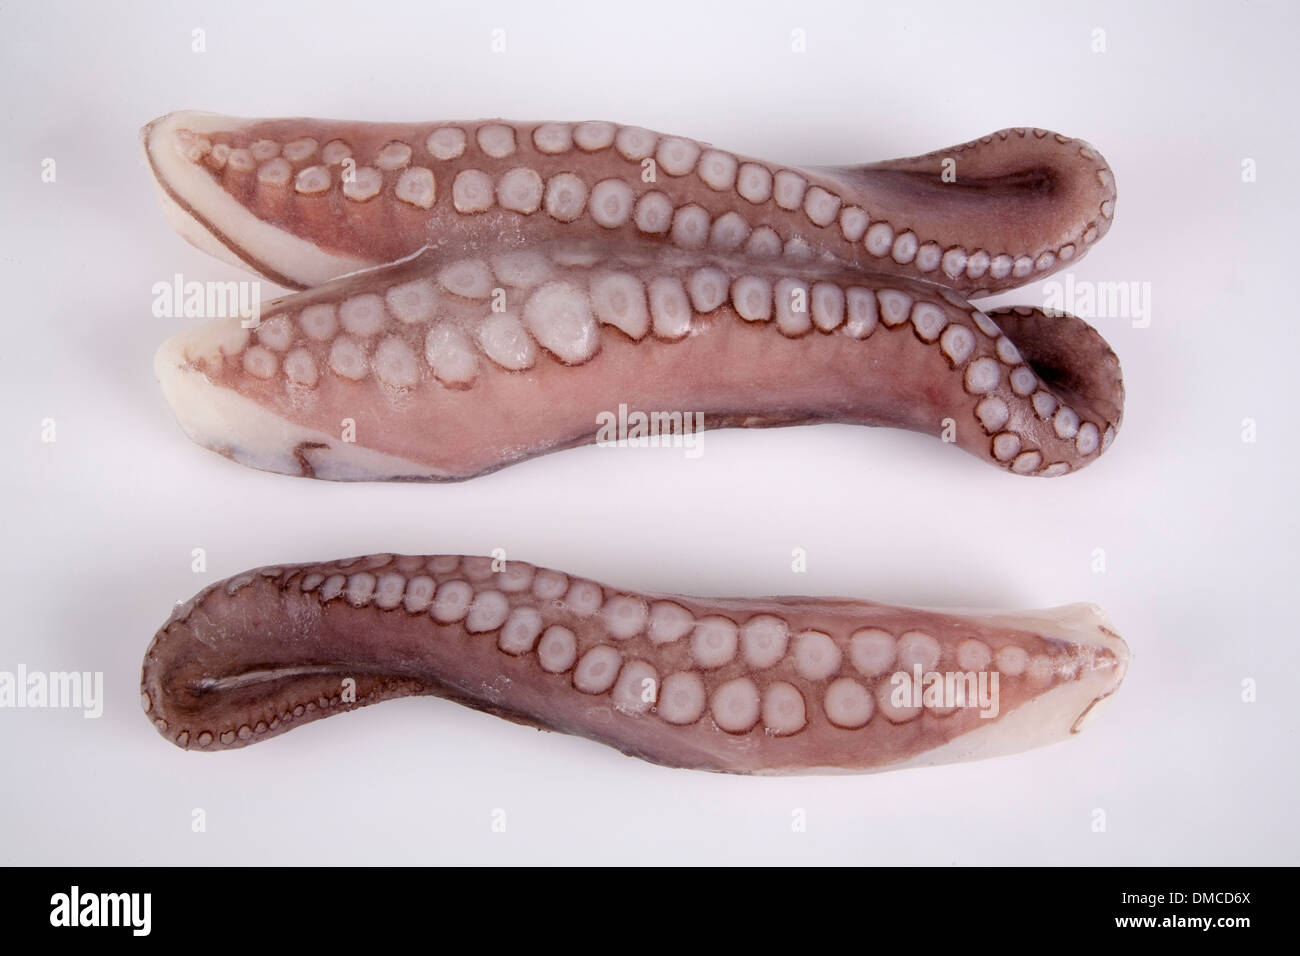 Octopus seafood frozen freeze raw uncooked food nutrition sea creature commerce buy sell wholesale package quantity many number Stock Photo